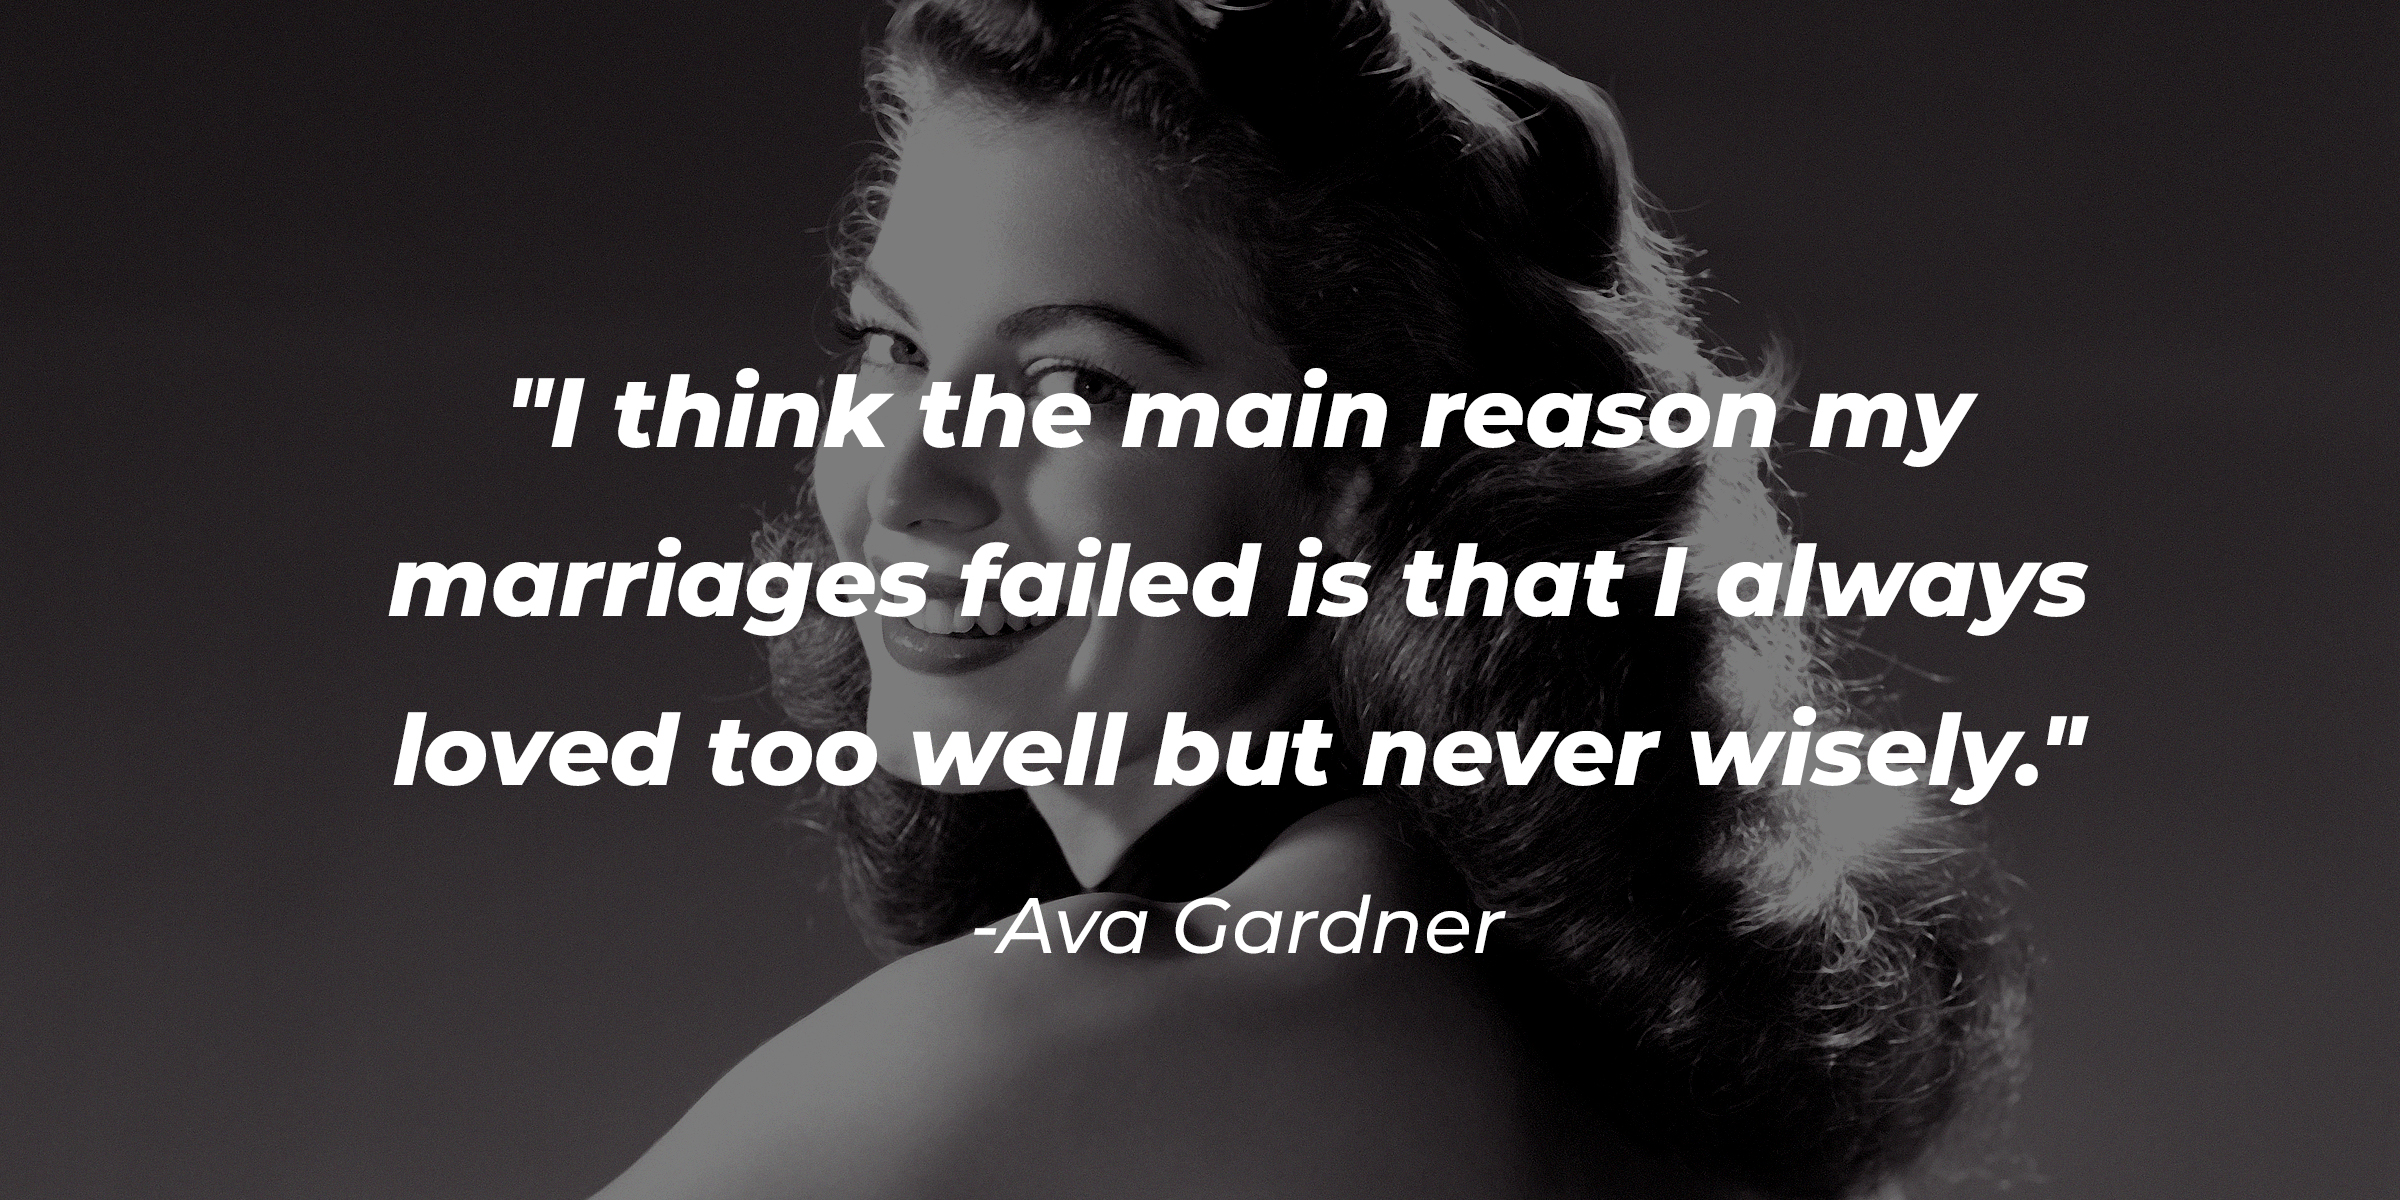 Ava Gardner's quote: "I think the main reason my marriages failed is that I always loved too well but never wisely." | Source: Getty Images